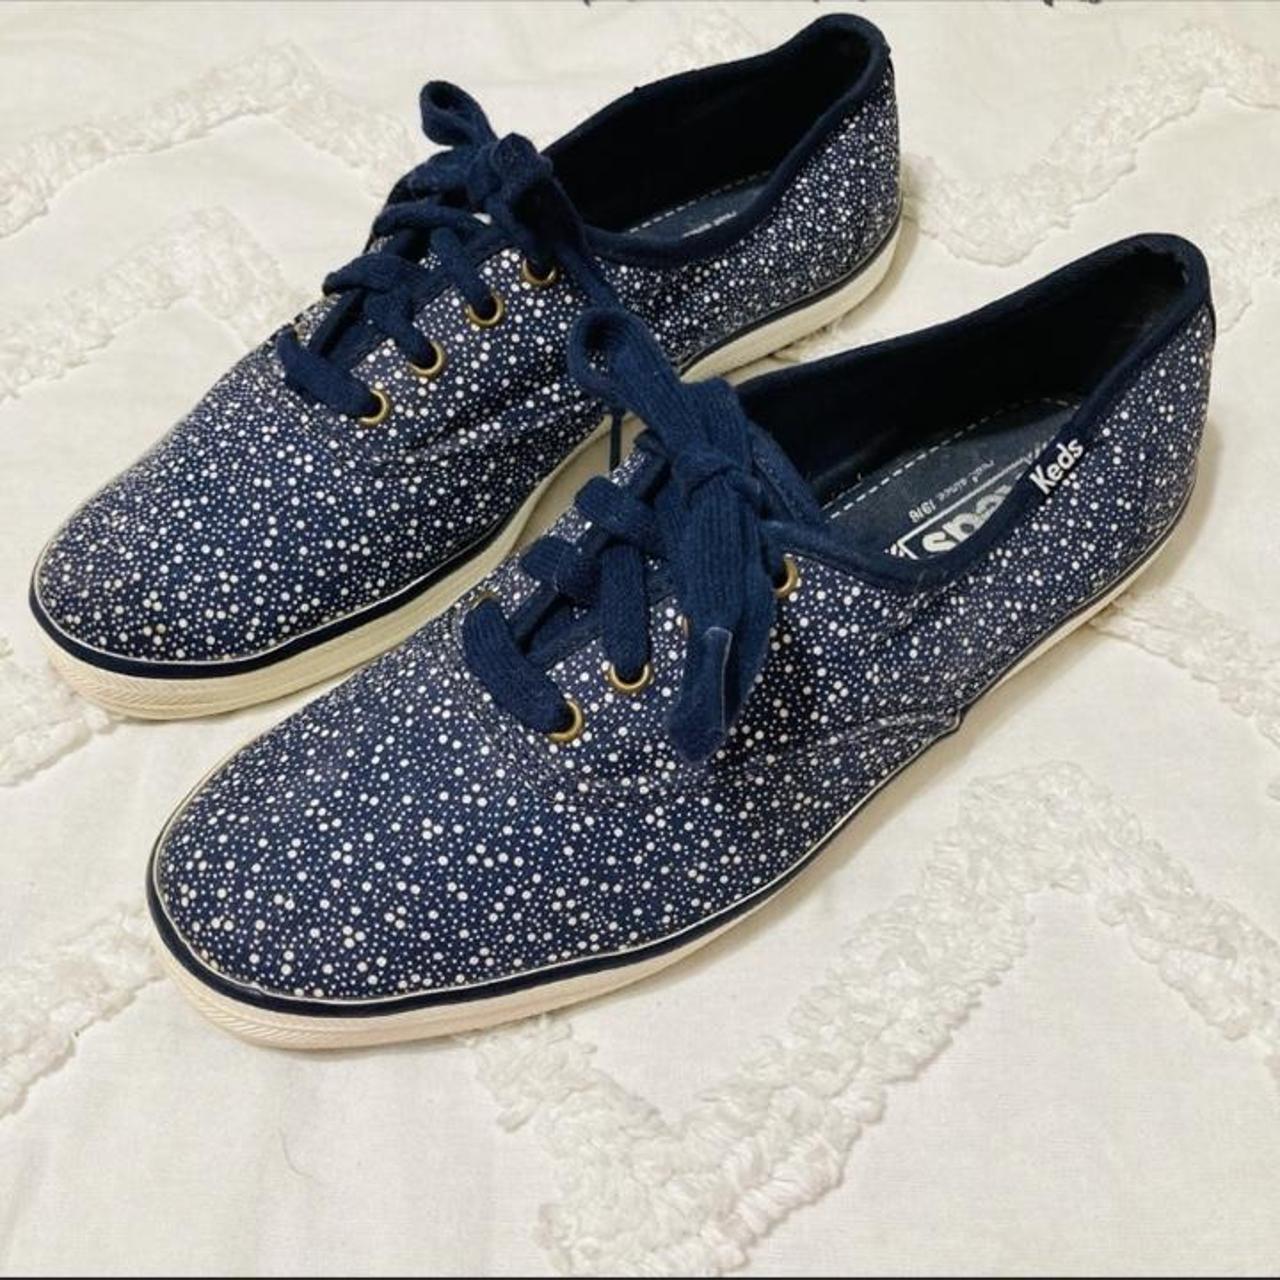 Product Image 2 - Polka Dot Twee Sneakers

Blue and